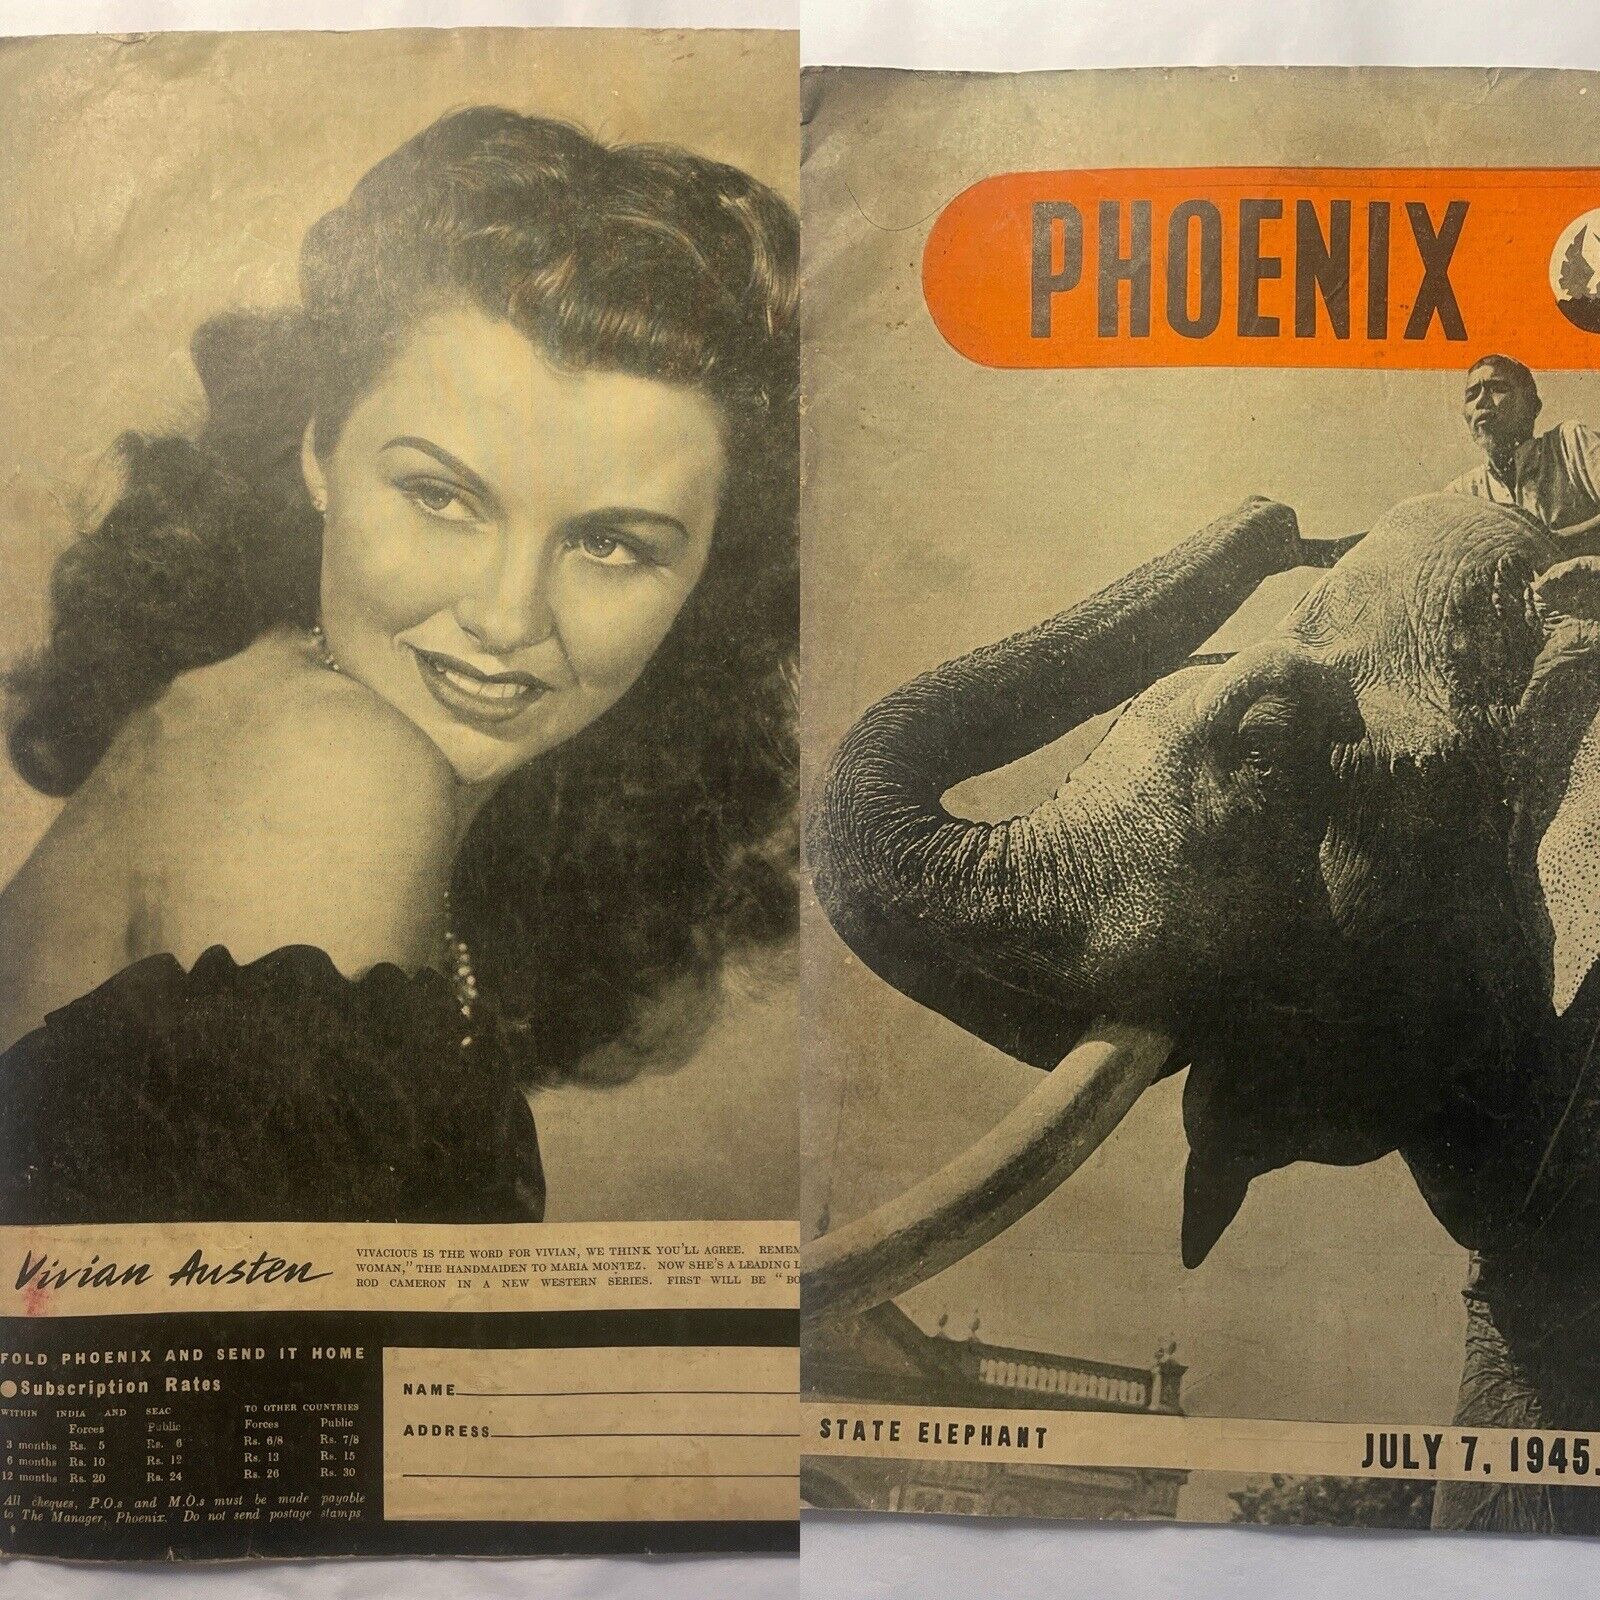 JULY 7, 1945 PHOENIX WWII MAGAZINE FOR ALLIES IN S.E. ASIA PINUP GIRL ON BACK